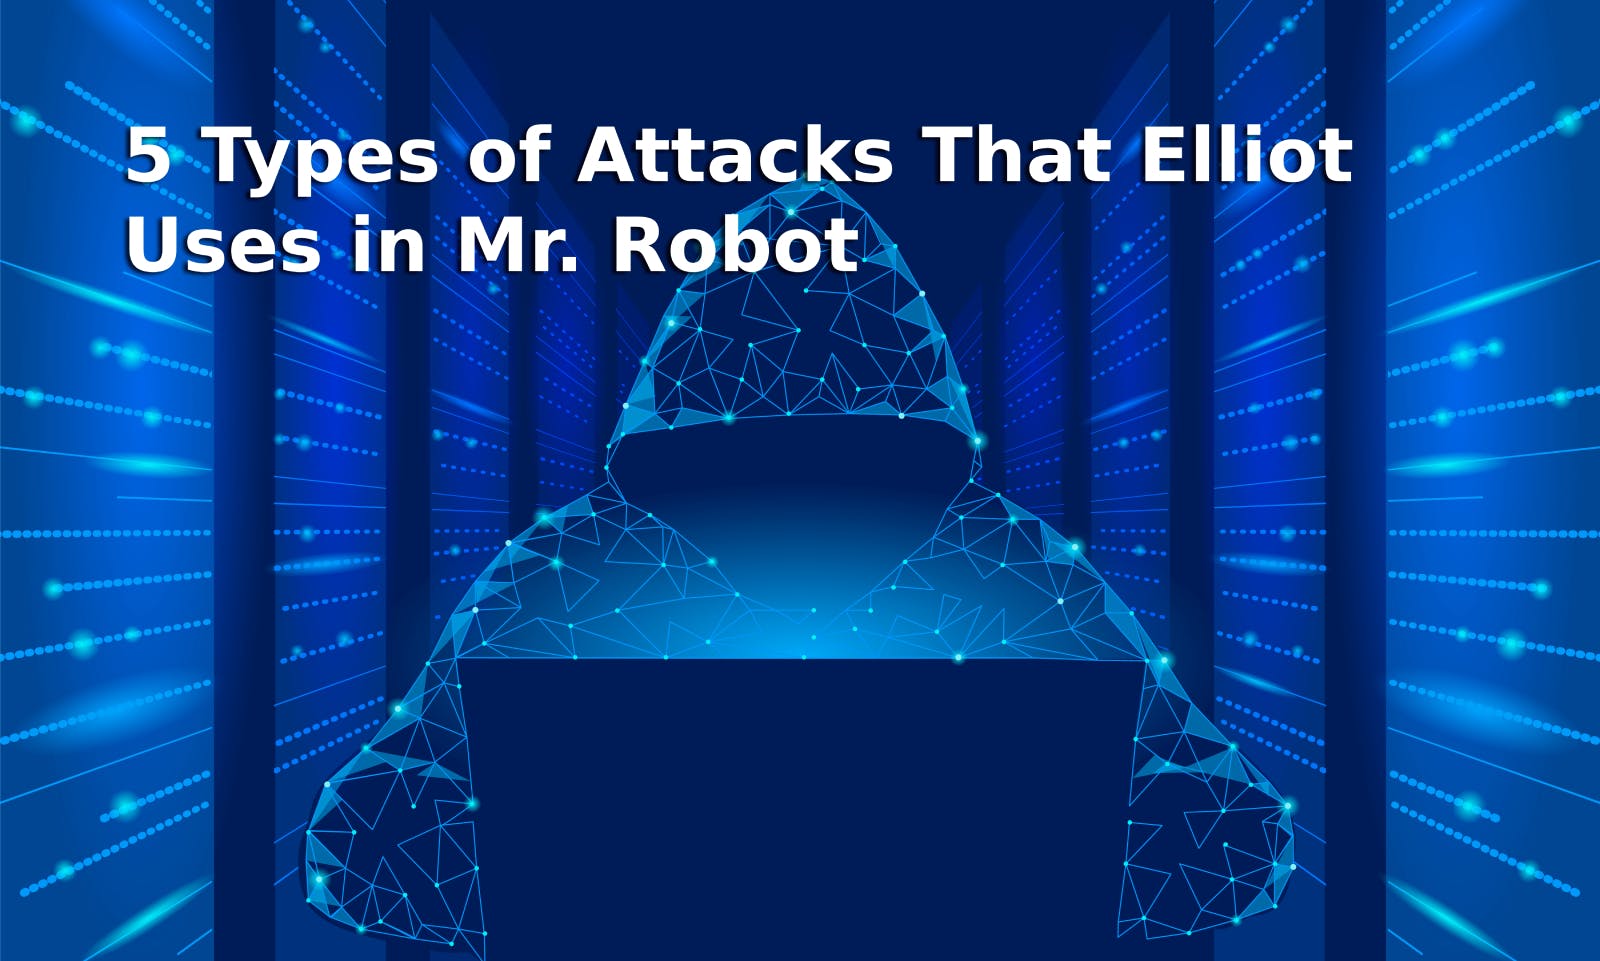 5 Types of Attacks That Elliot Uses in Mr. Robot